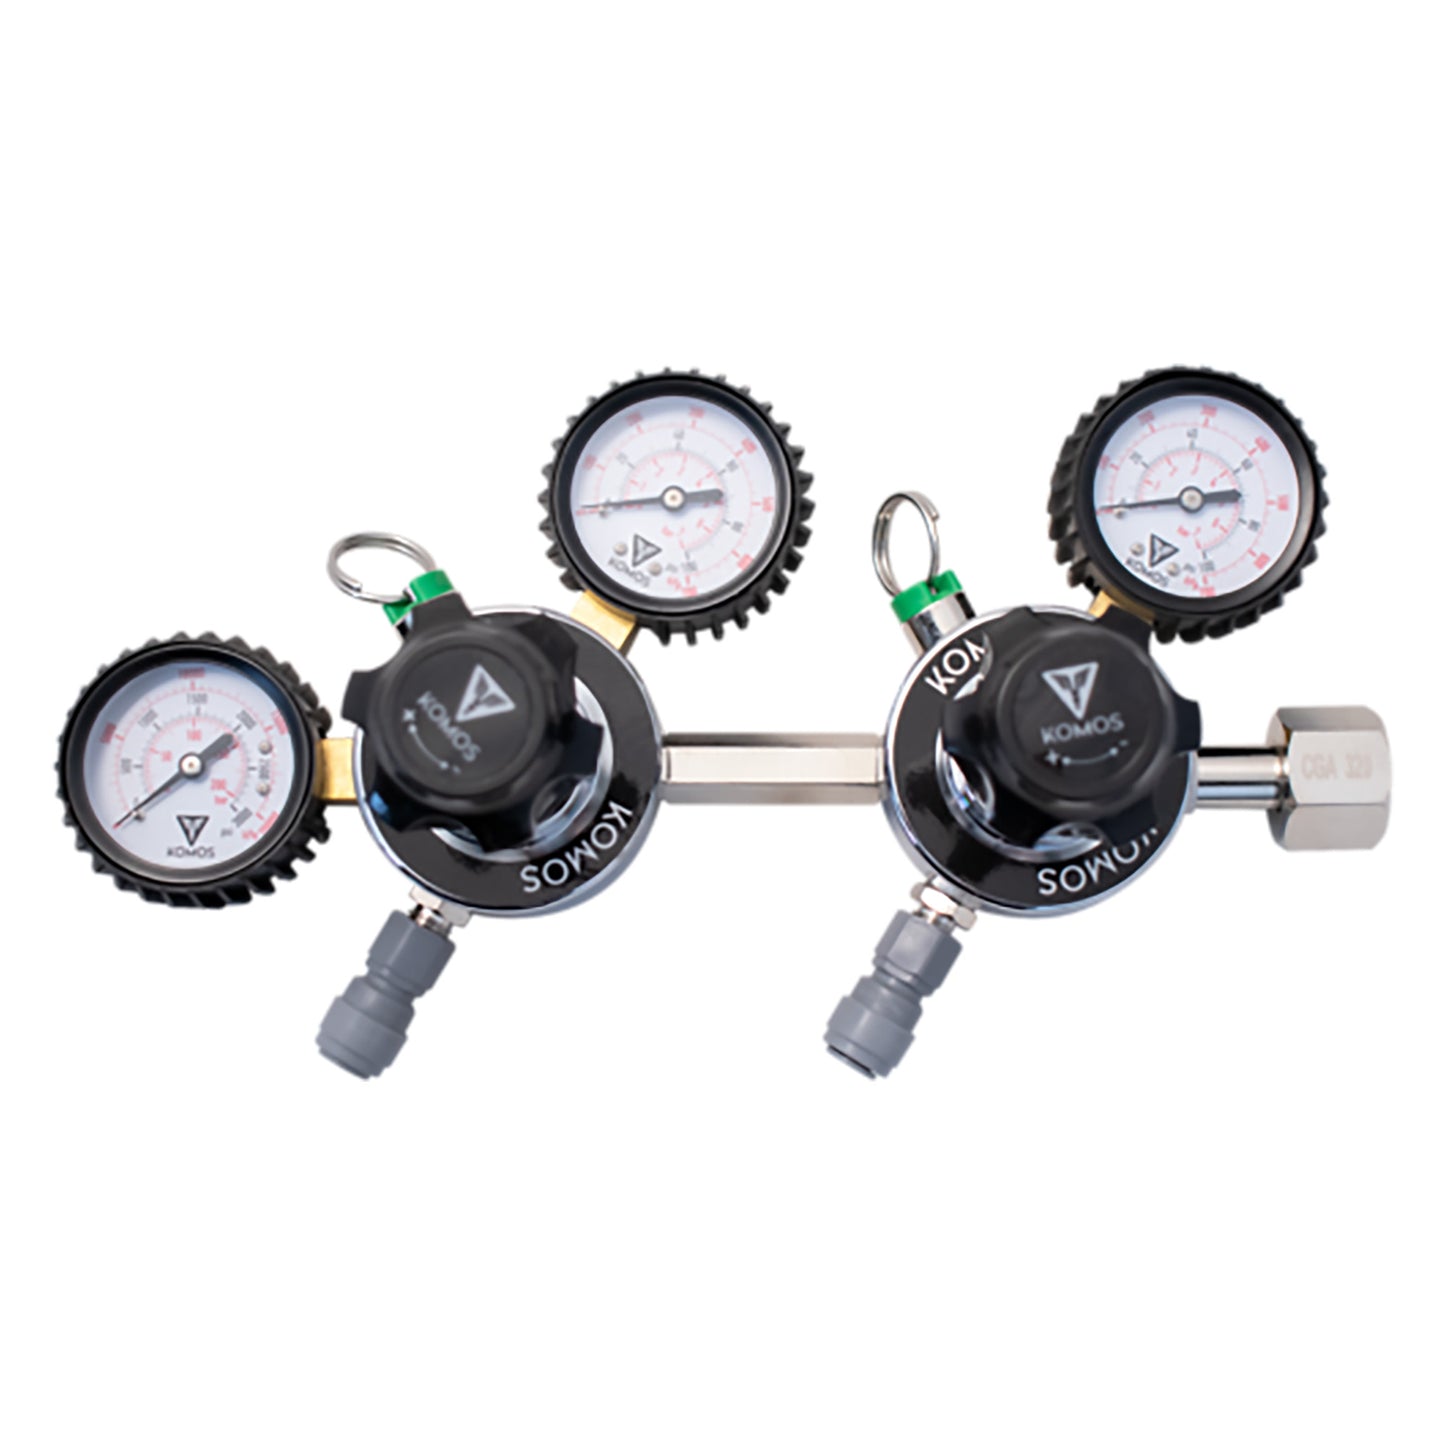 Products Double CO2 Economy Regulator w/ 1/4 Barb and Duotite mfl, 60# & 2000# Gauges